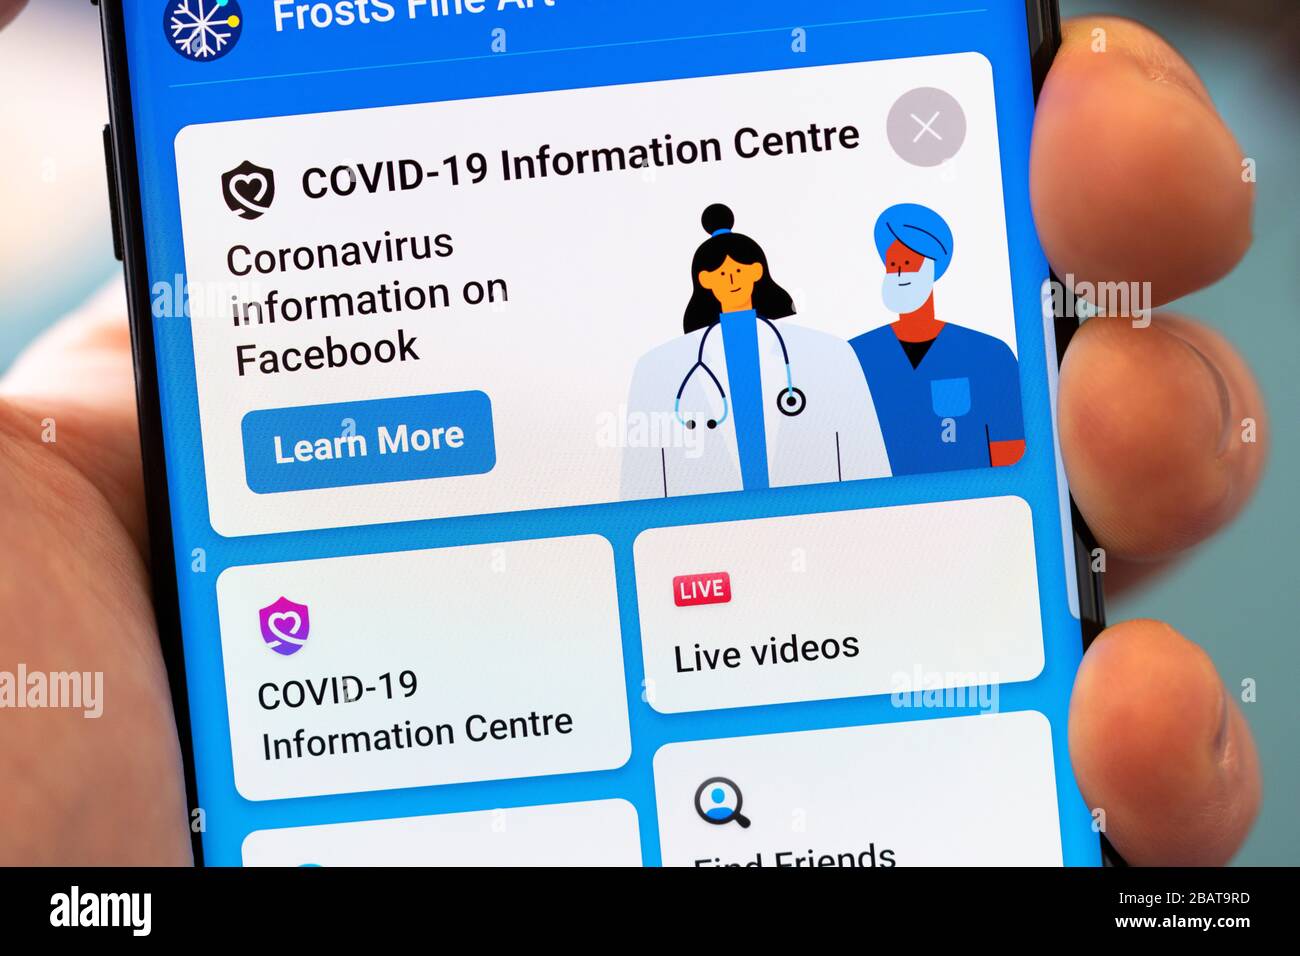 Facebook advertising its online Covid-19 Information Centre on a smartphone. UK. Concept: fighting fake news, misinformation, reliable information Stock Photo